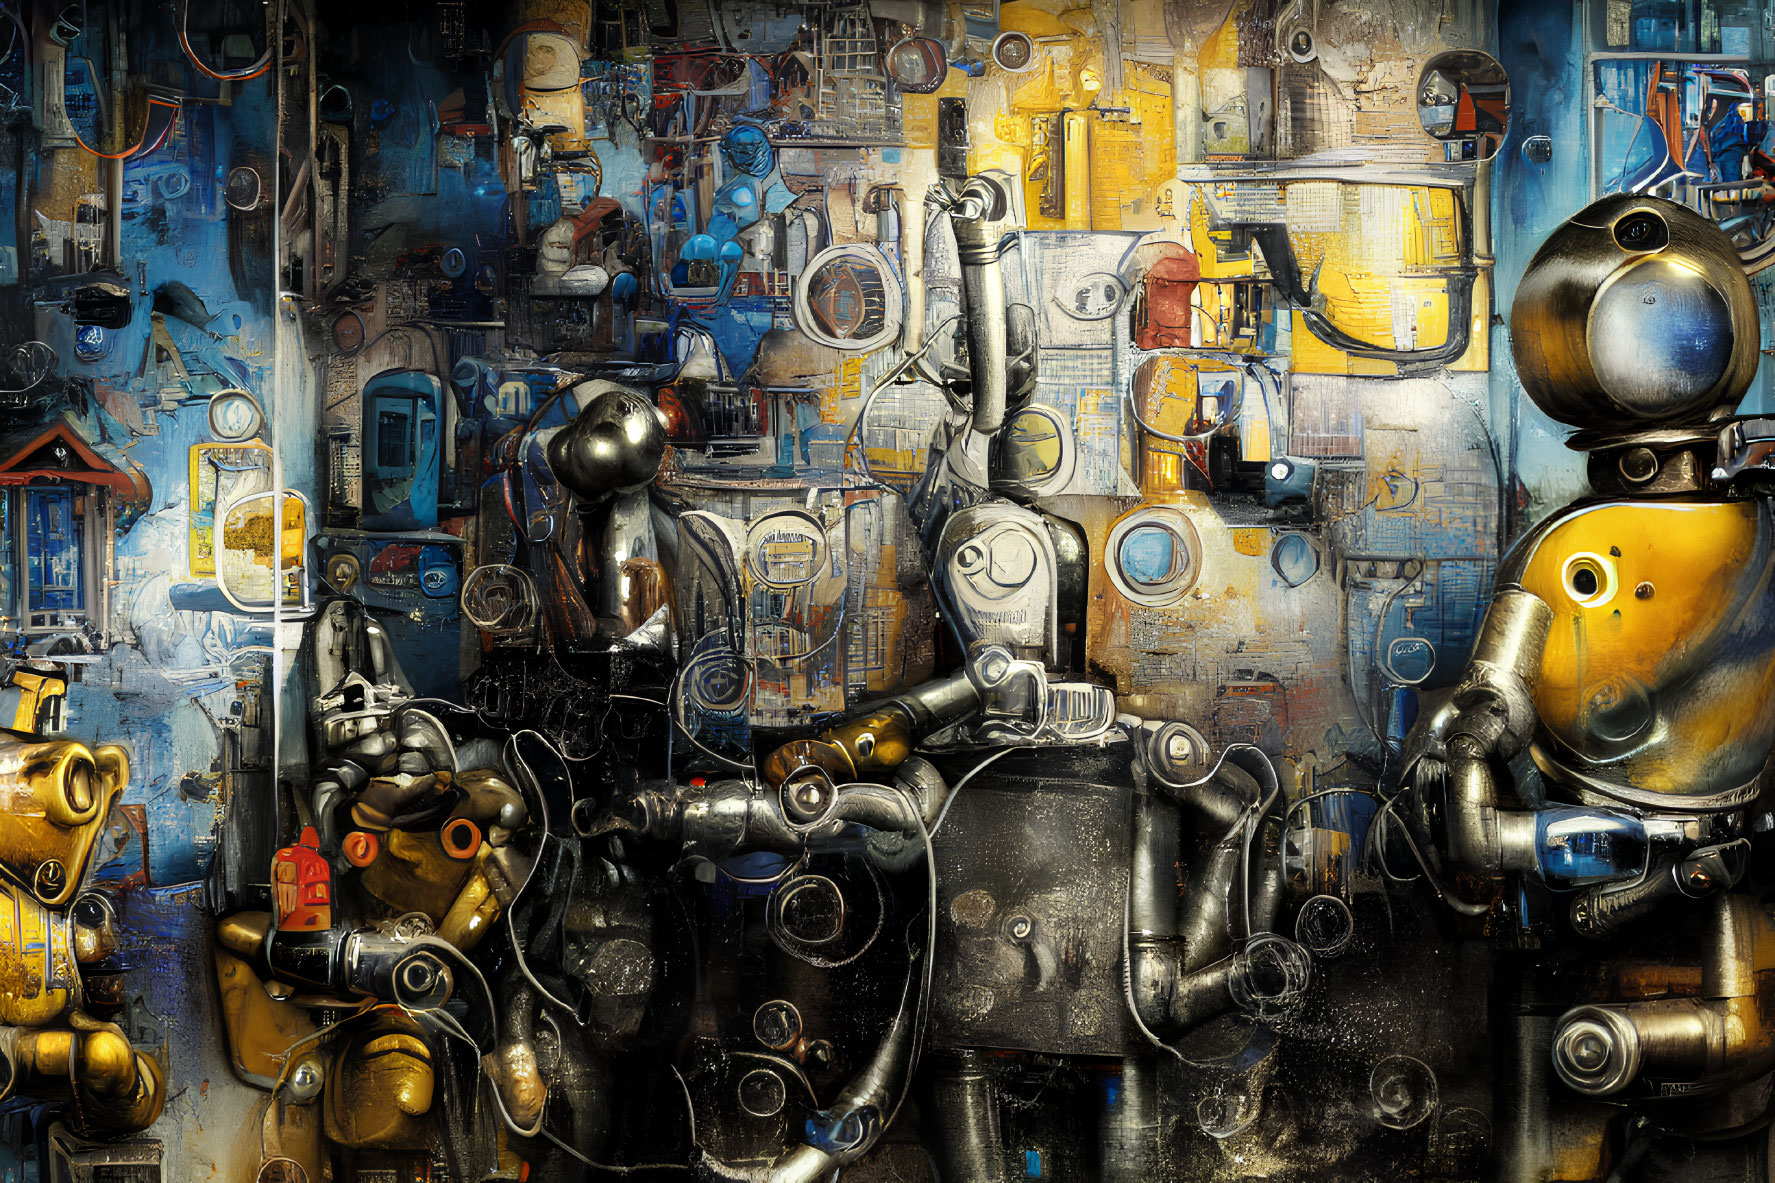 Colorful robots in industrial setting with blue and yellow tones